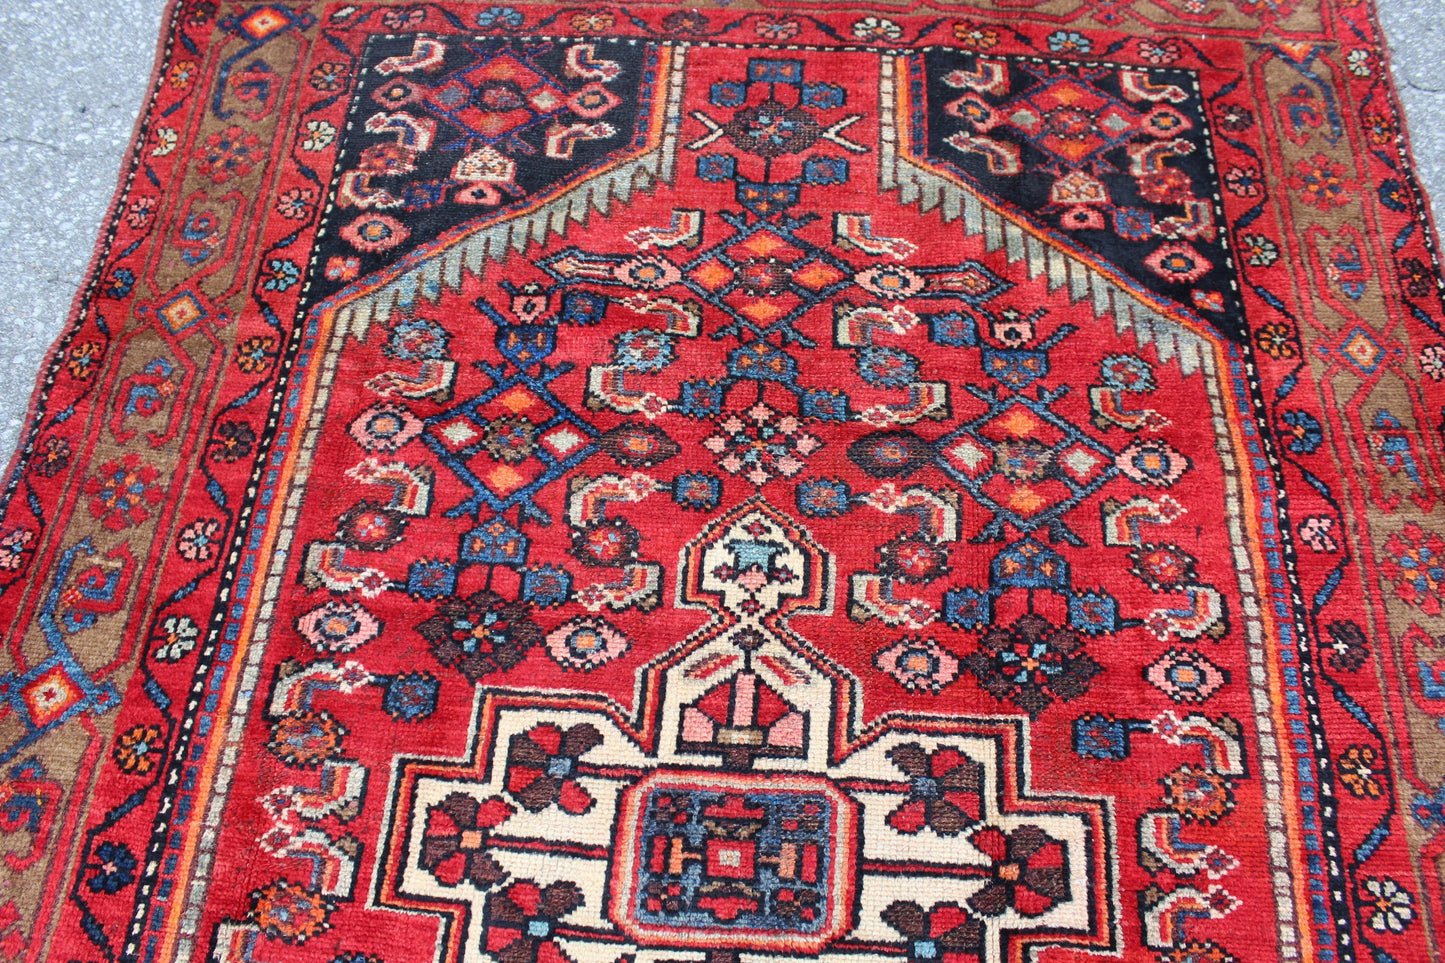 Bright Red Handmade 4x6 Wool Rug with Navy Blue Corners